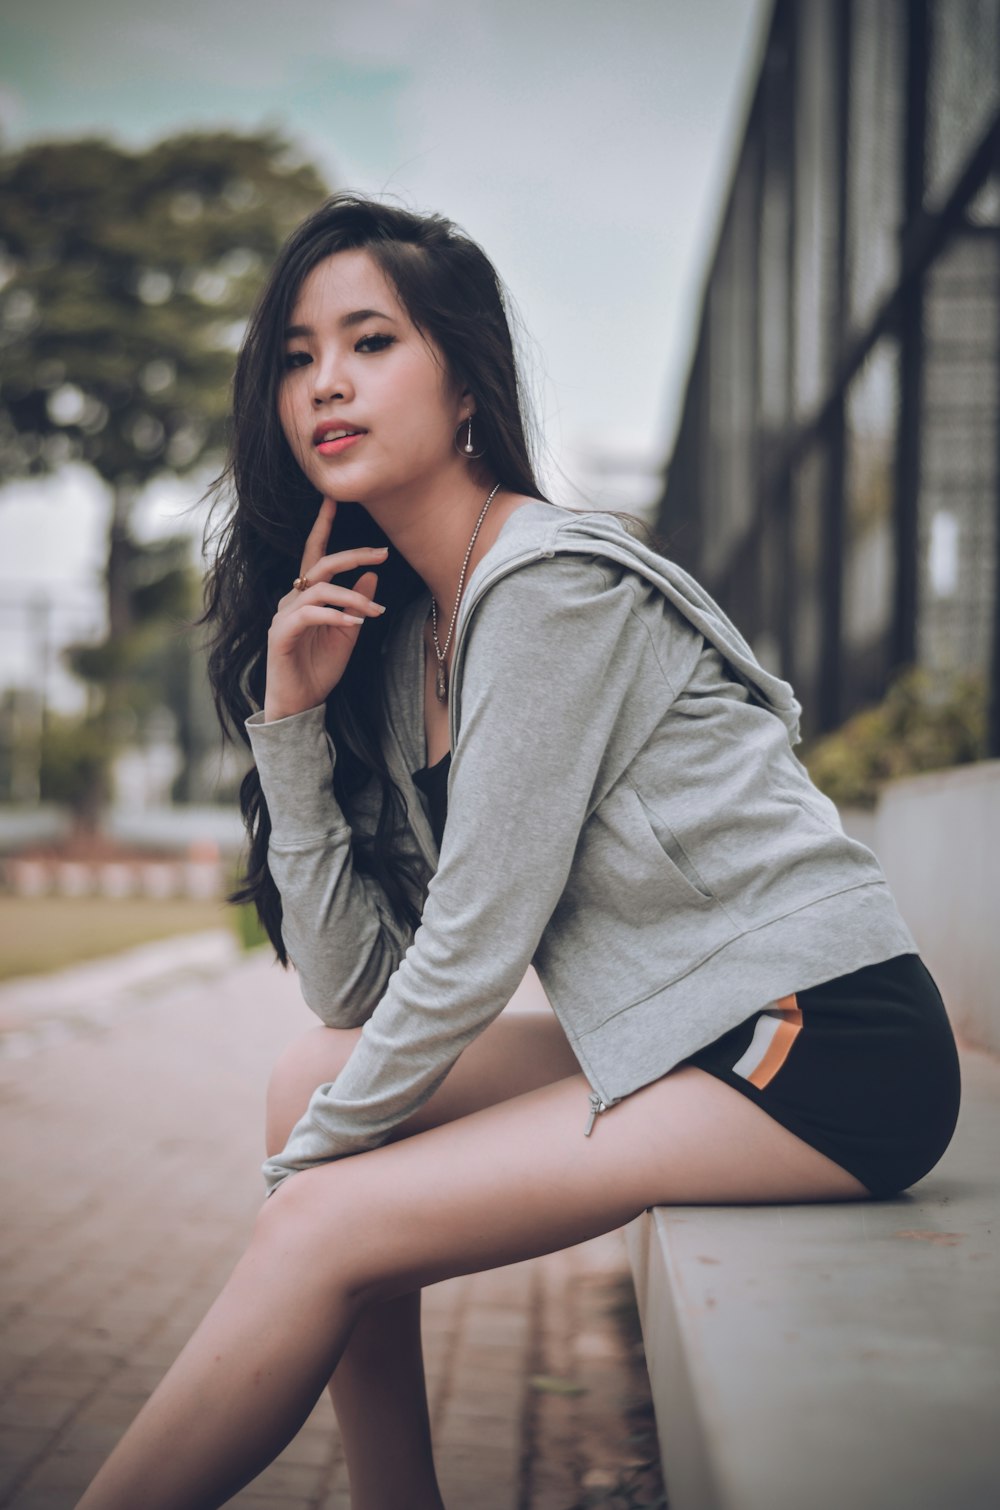 woman in grey zip-up hoodie and black shorts sitting on concrete bench  photo – Free Grey Image on Unsplash